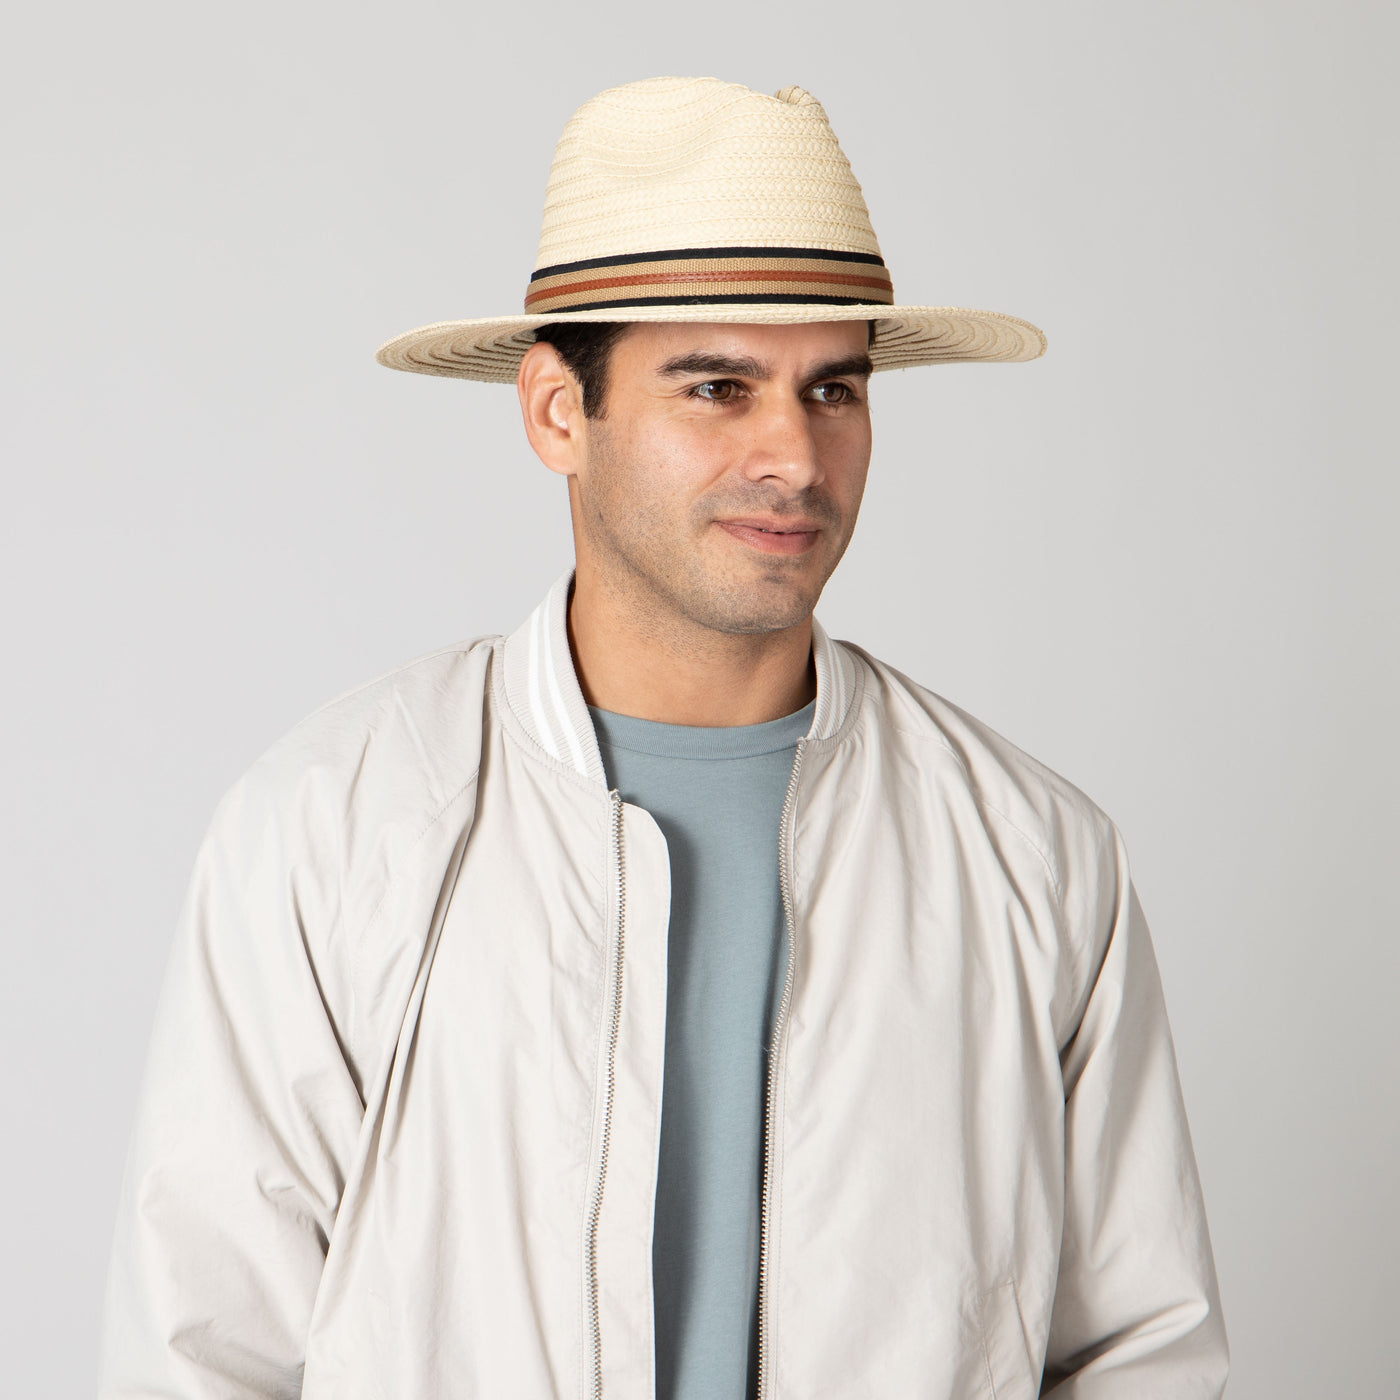 FEDORA - Men's Panama With Layered Webbing & Faux Leather Trim